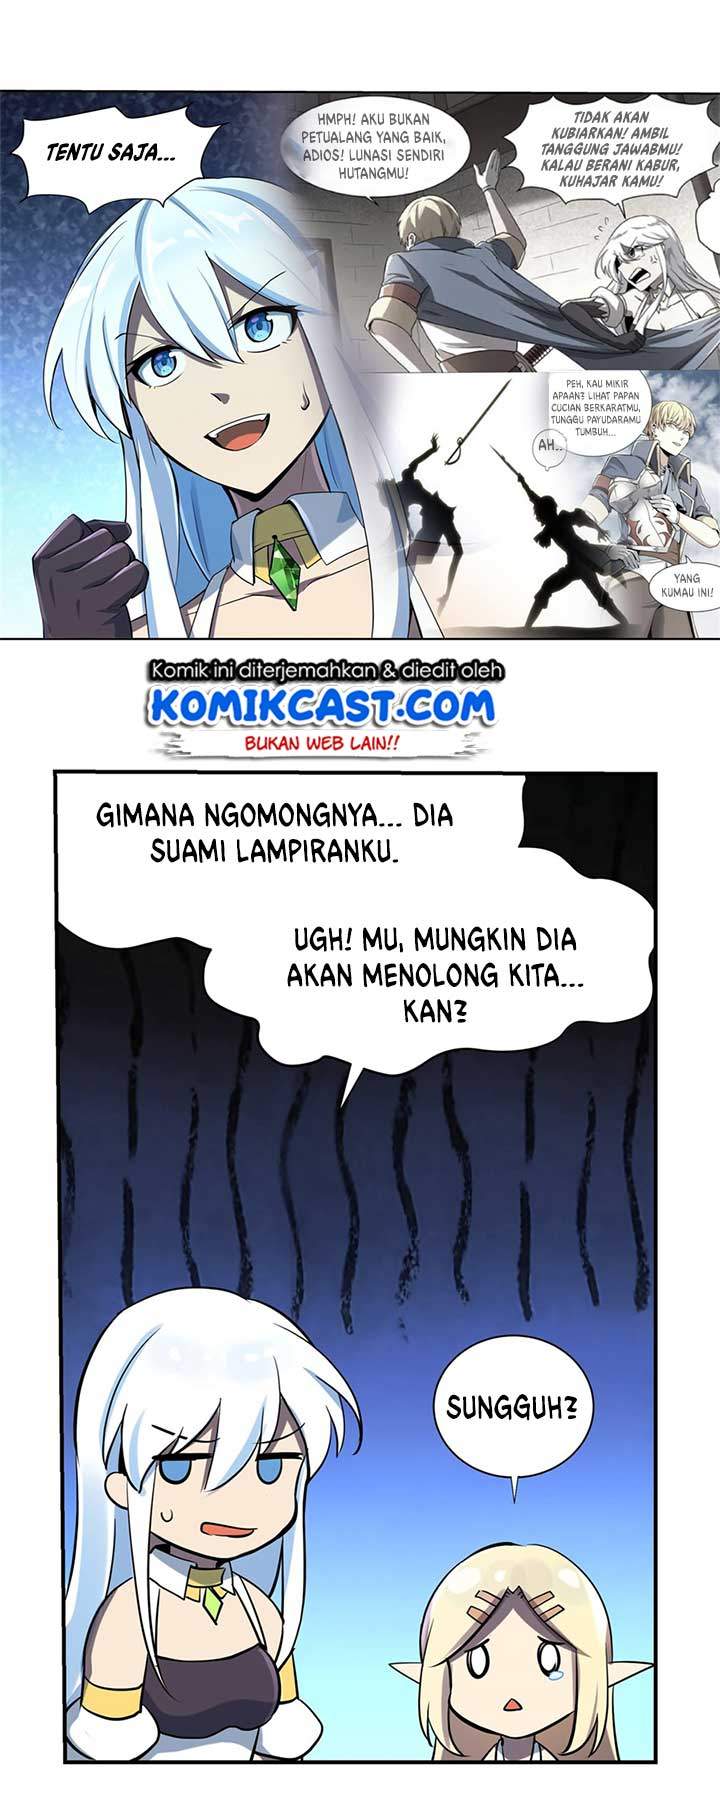 The Demon King Who Lost His Job Chapter 61 Bahasa Indonesia